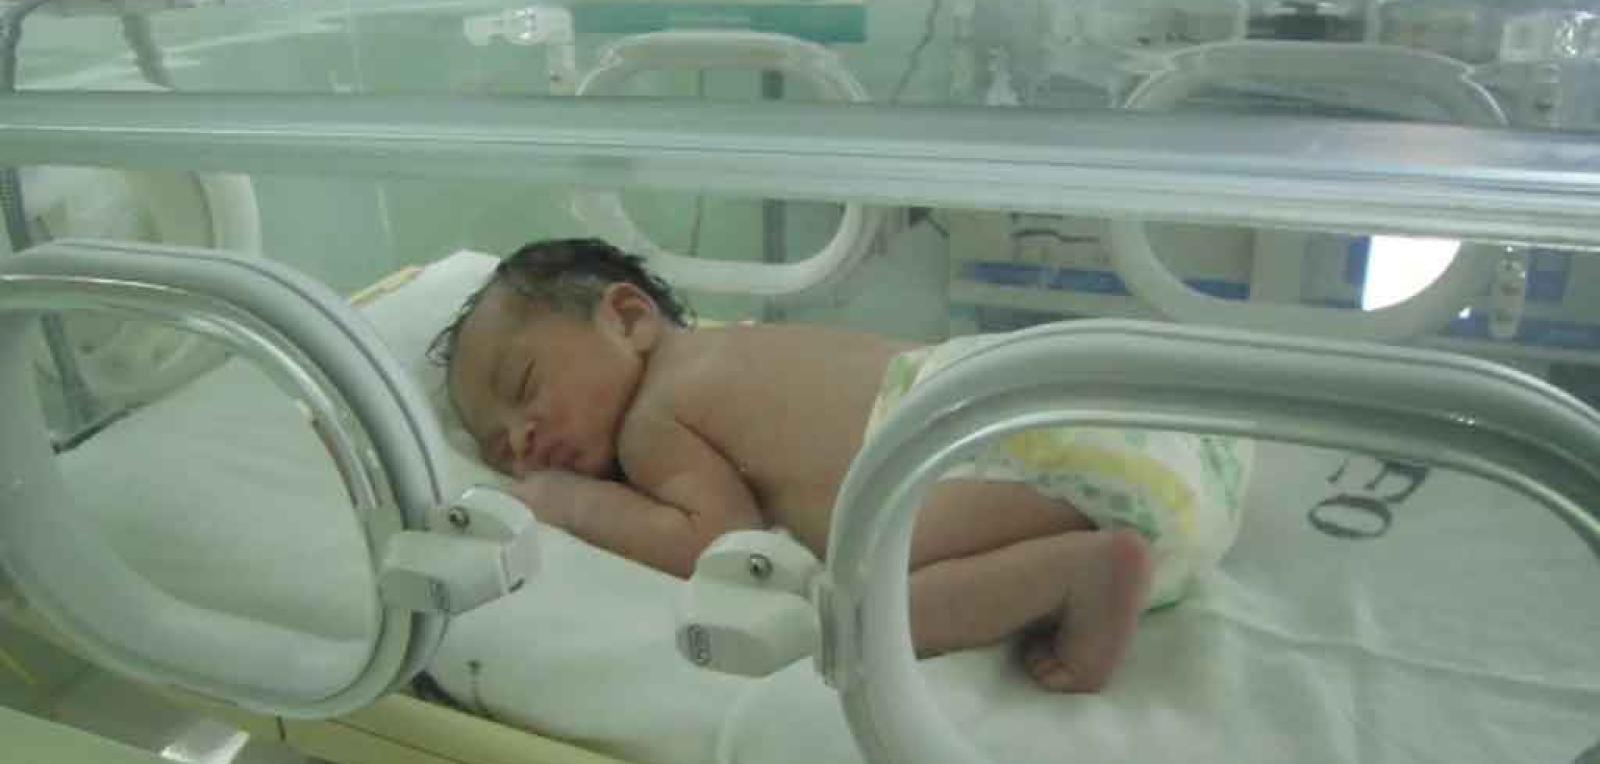 UNICEF supports Cuba’s neonatology services